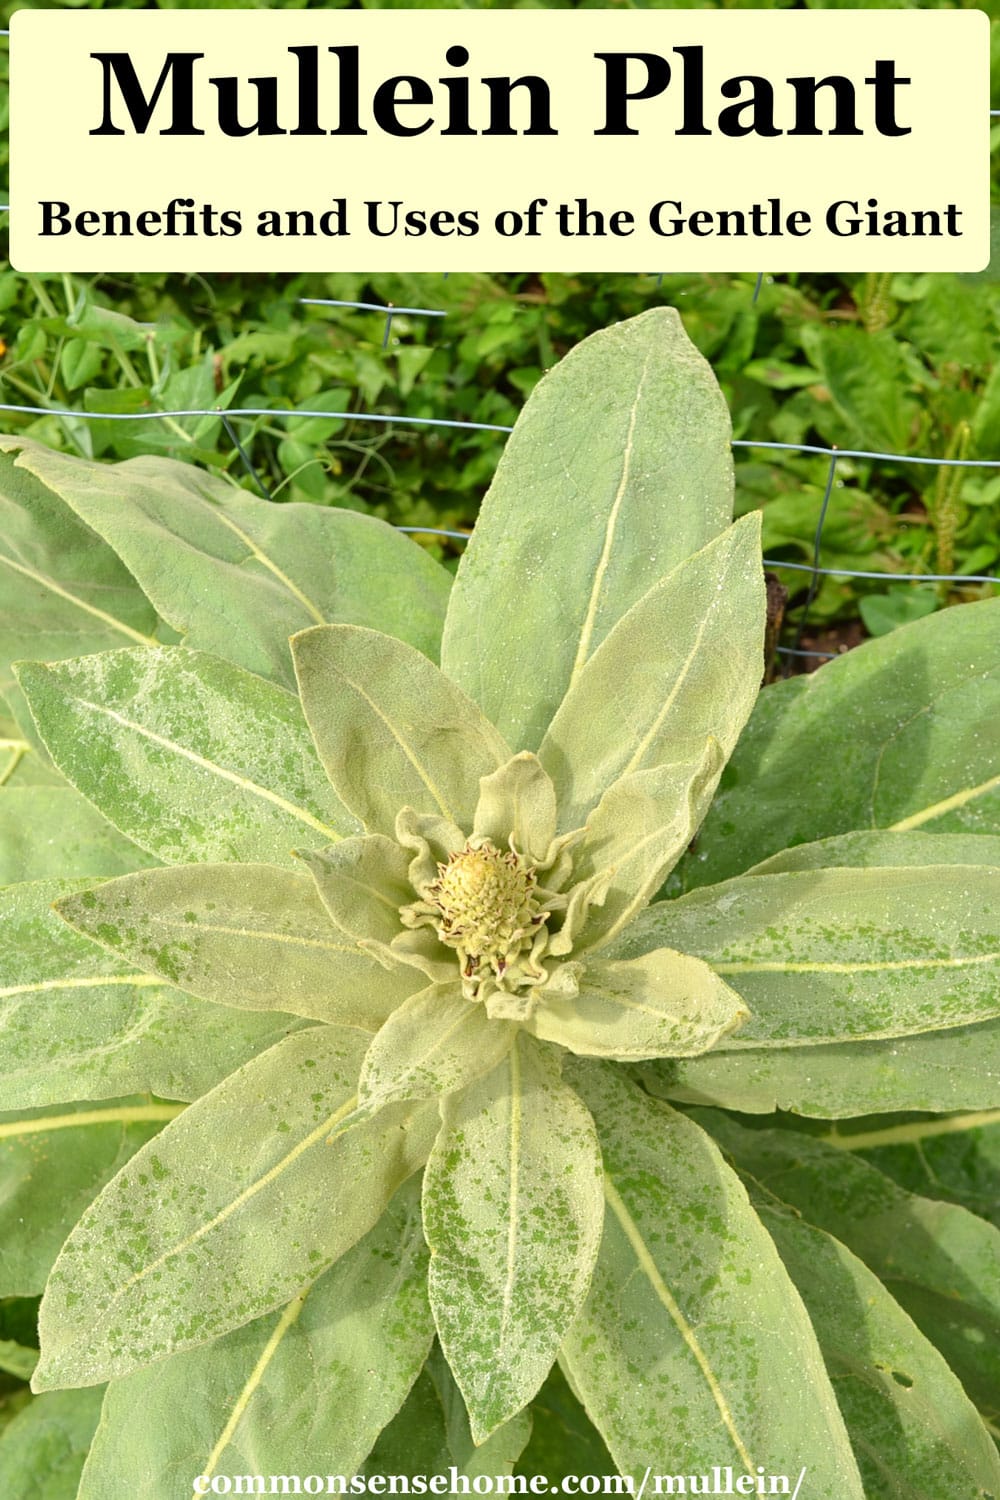 Mullein Plant - Benefits and Uses of the Gentle Giant